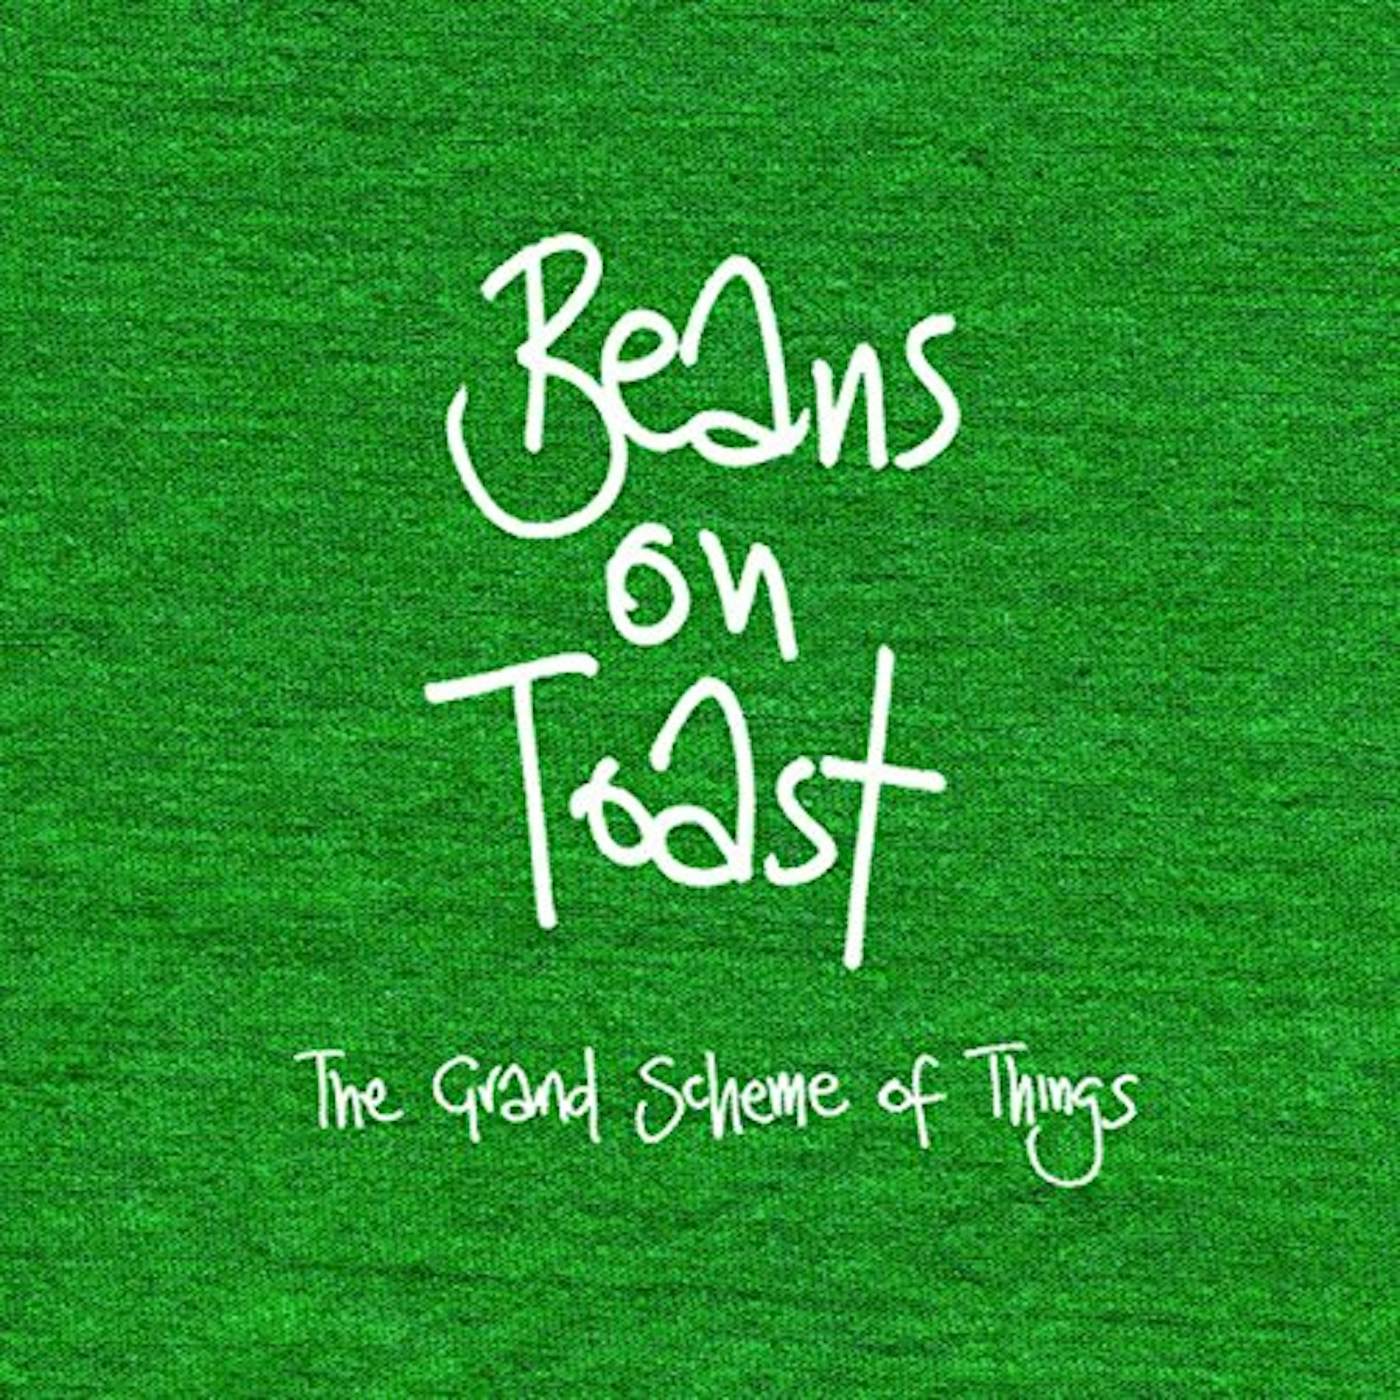 Beans on Toast GRAND SCHEME OF THINGS CD